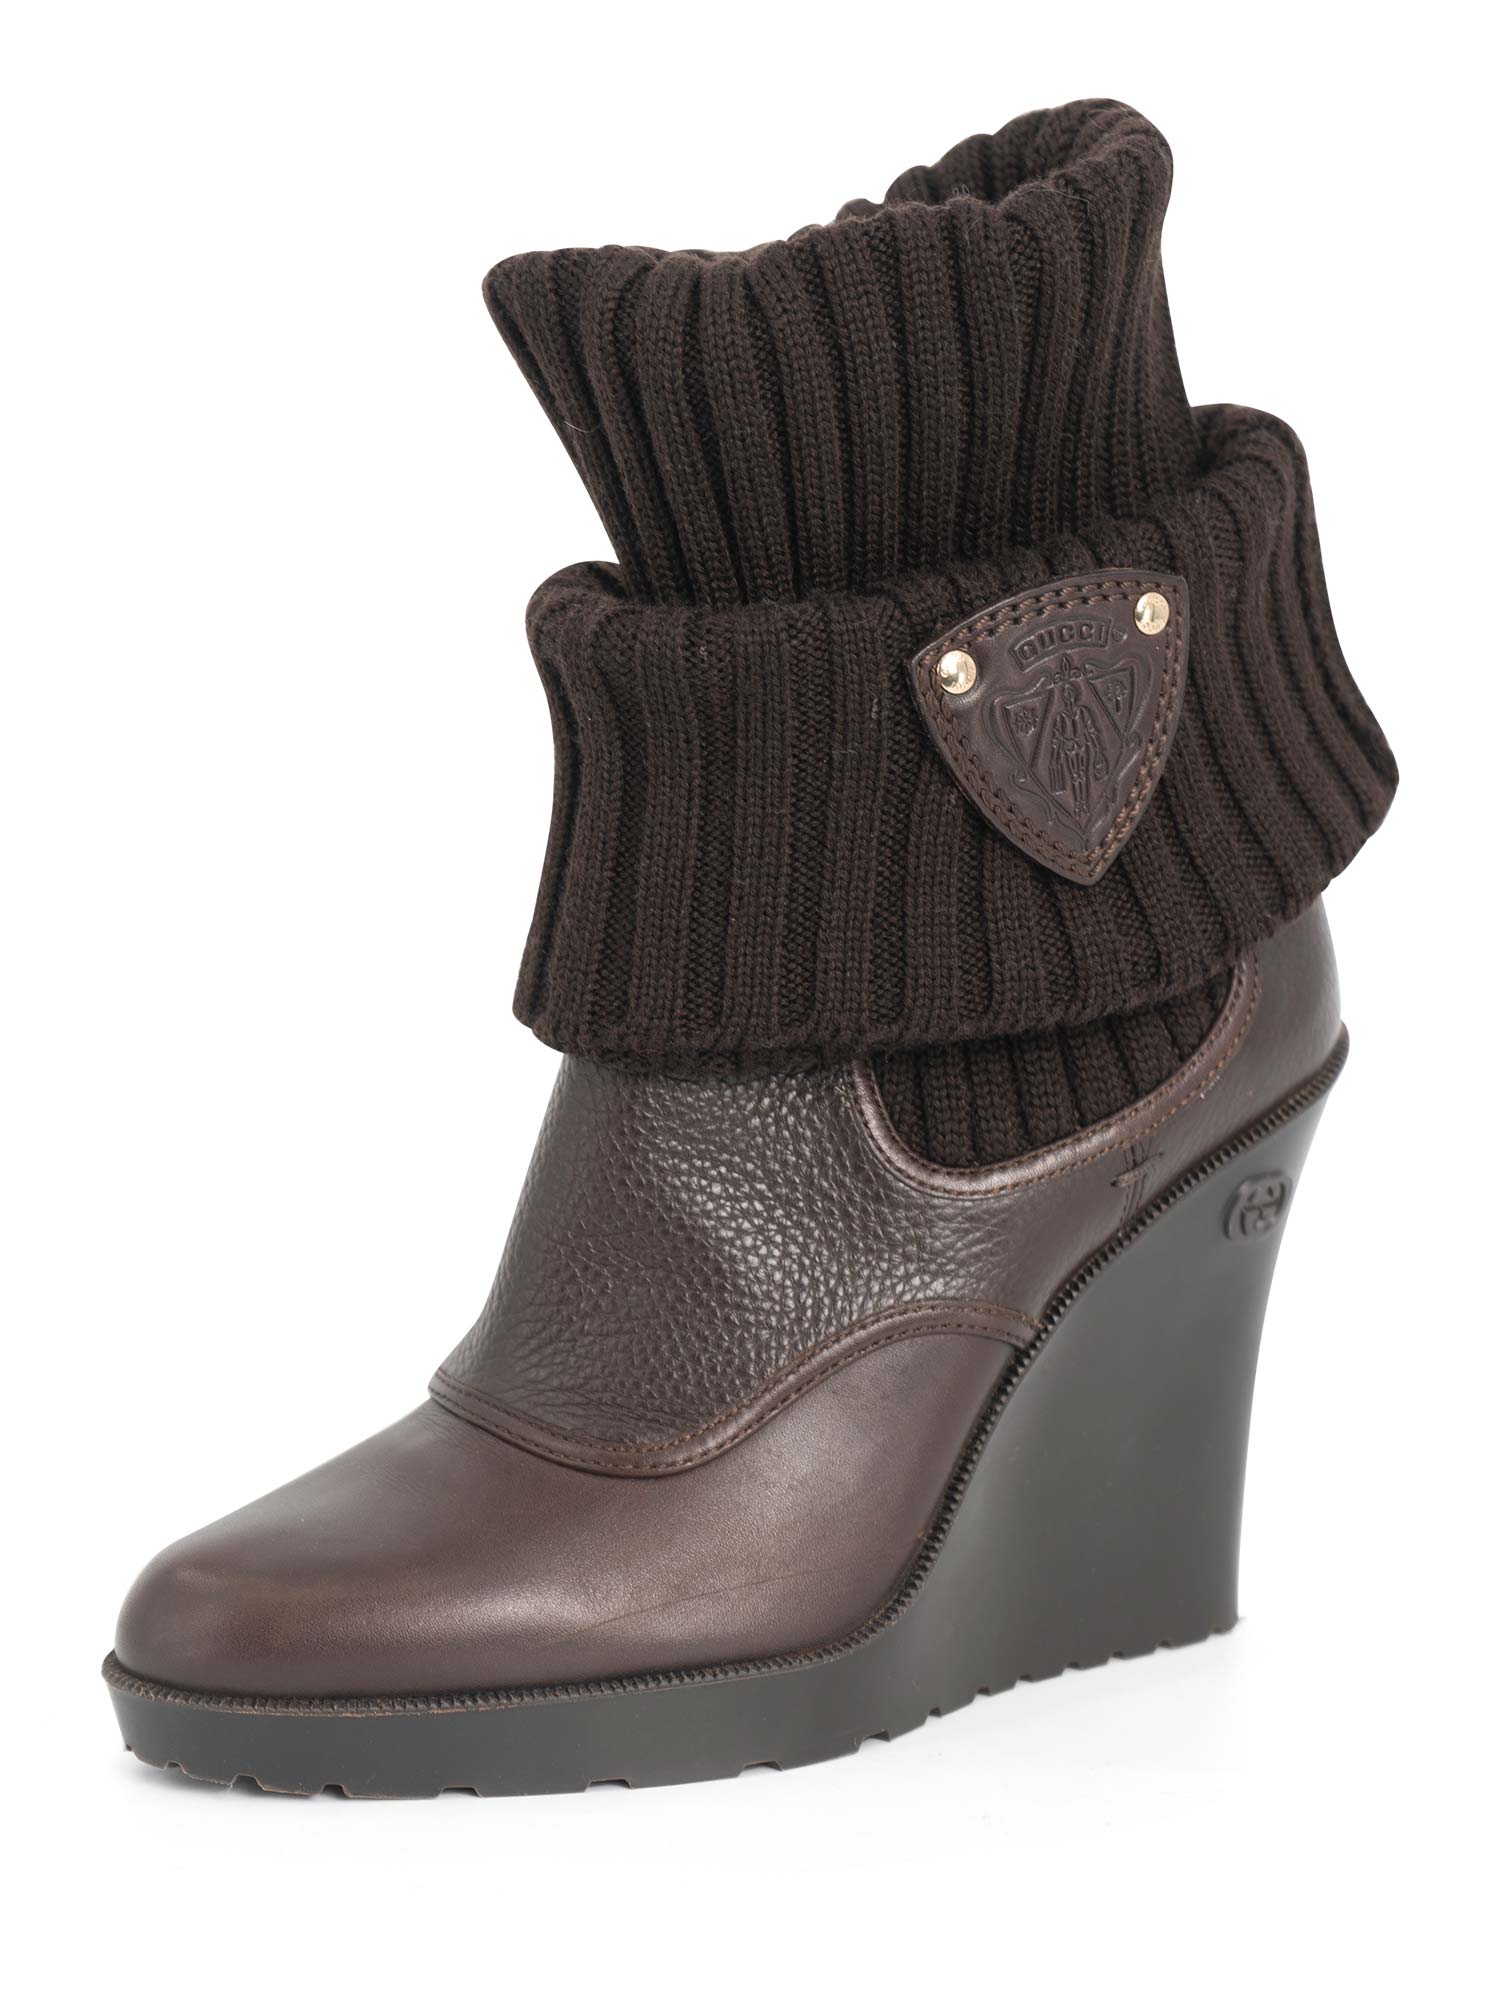 Gucci GG Logo Leather Knit Sock Wedge Boots Brown